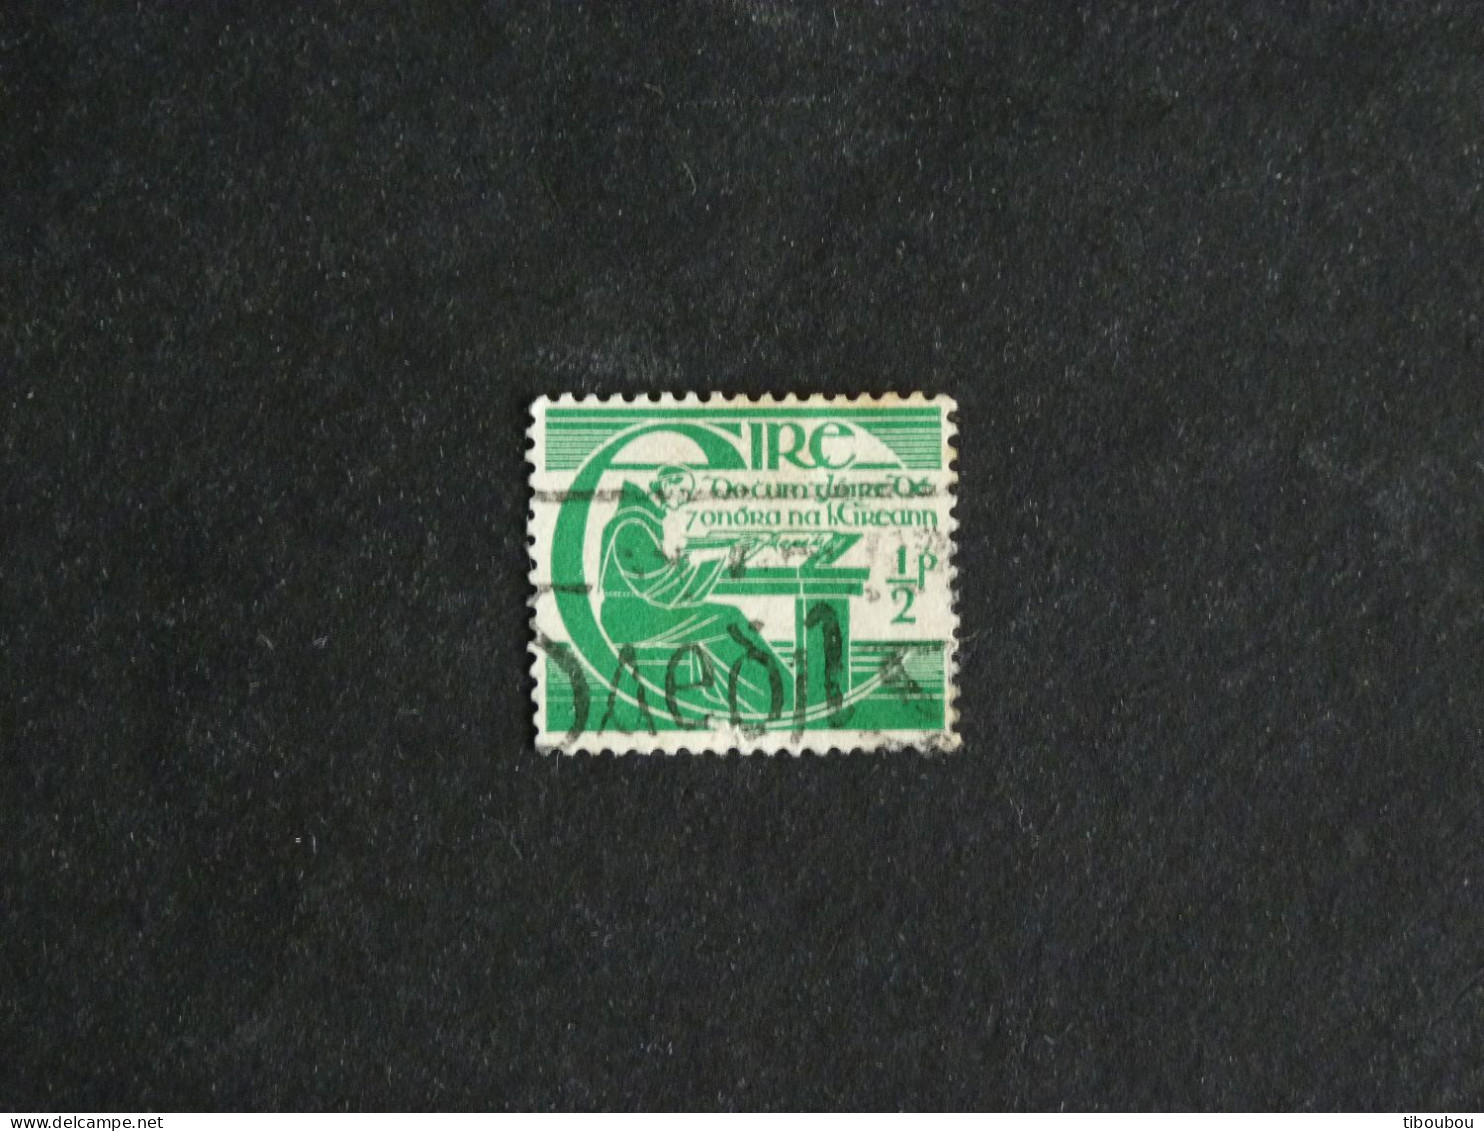 IRLANDE IRELAND EIRE YT 99 OBLITERE - MICHAEL O' CLEIRIGH - Used Stamps